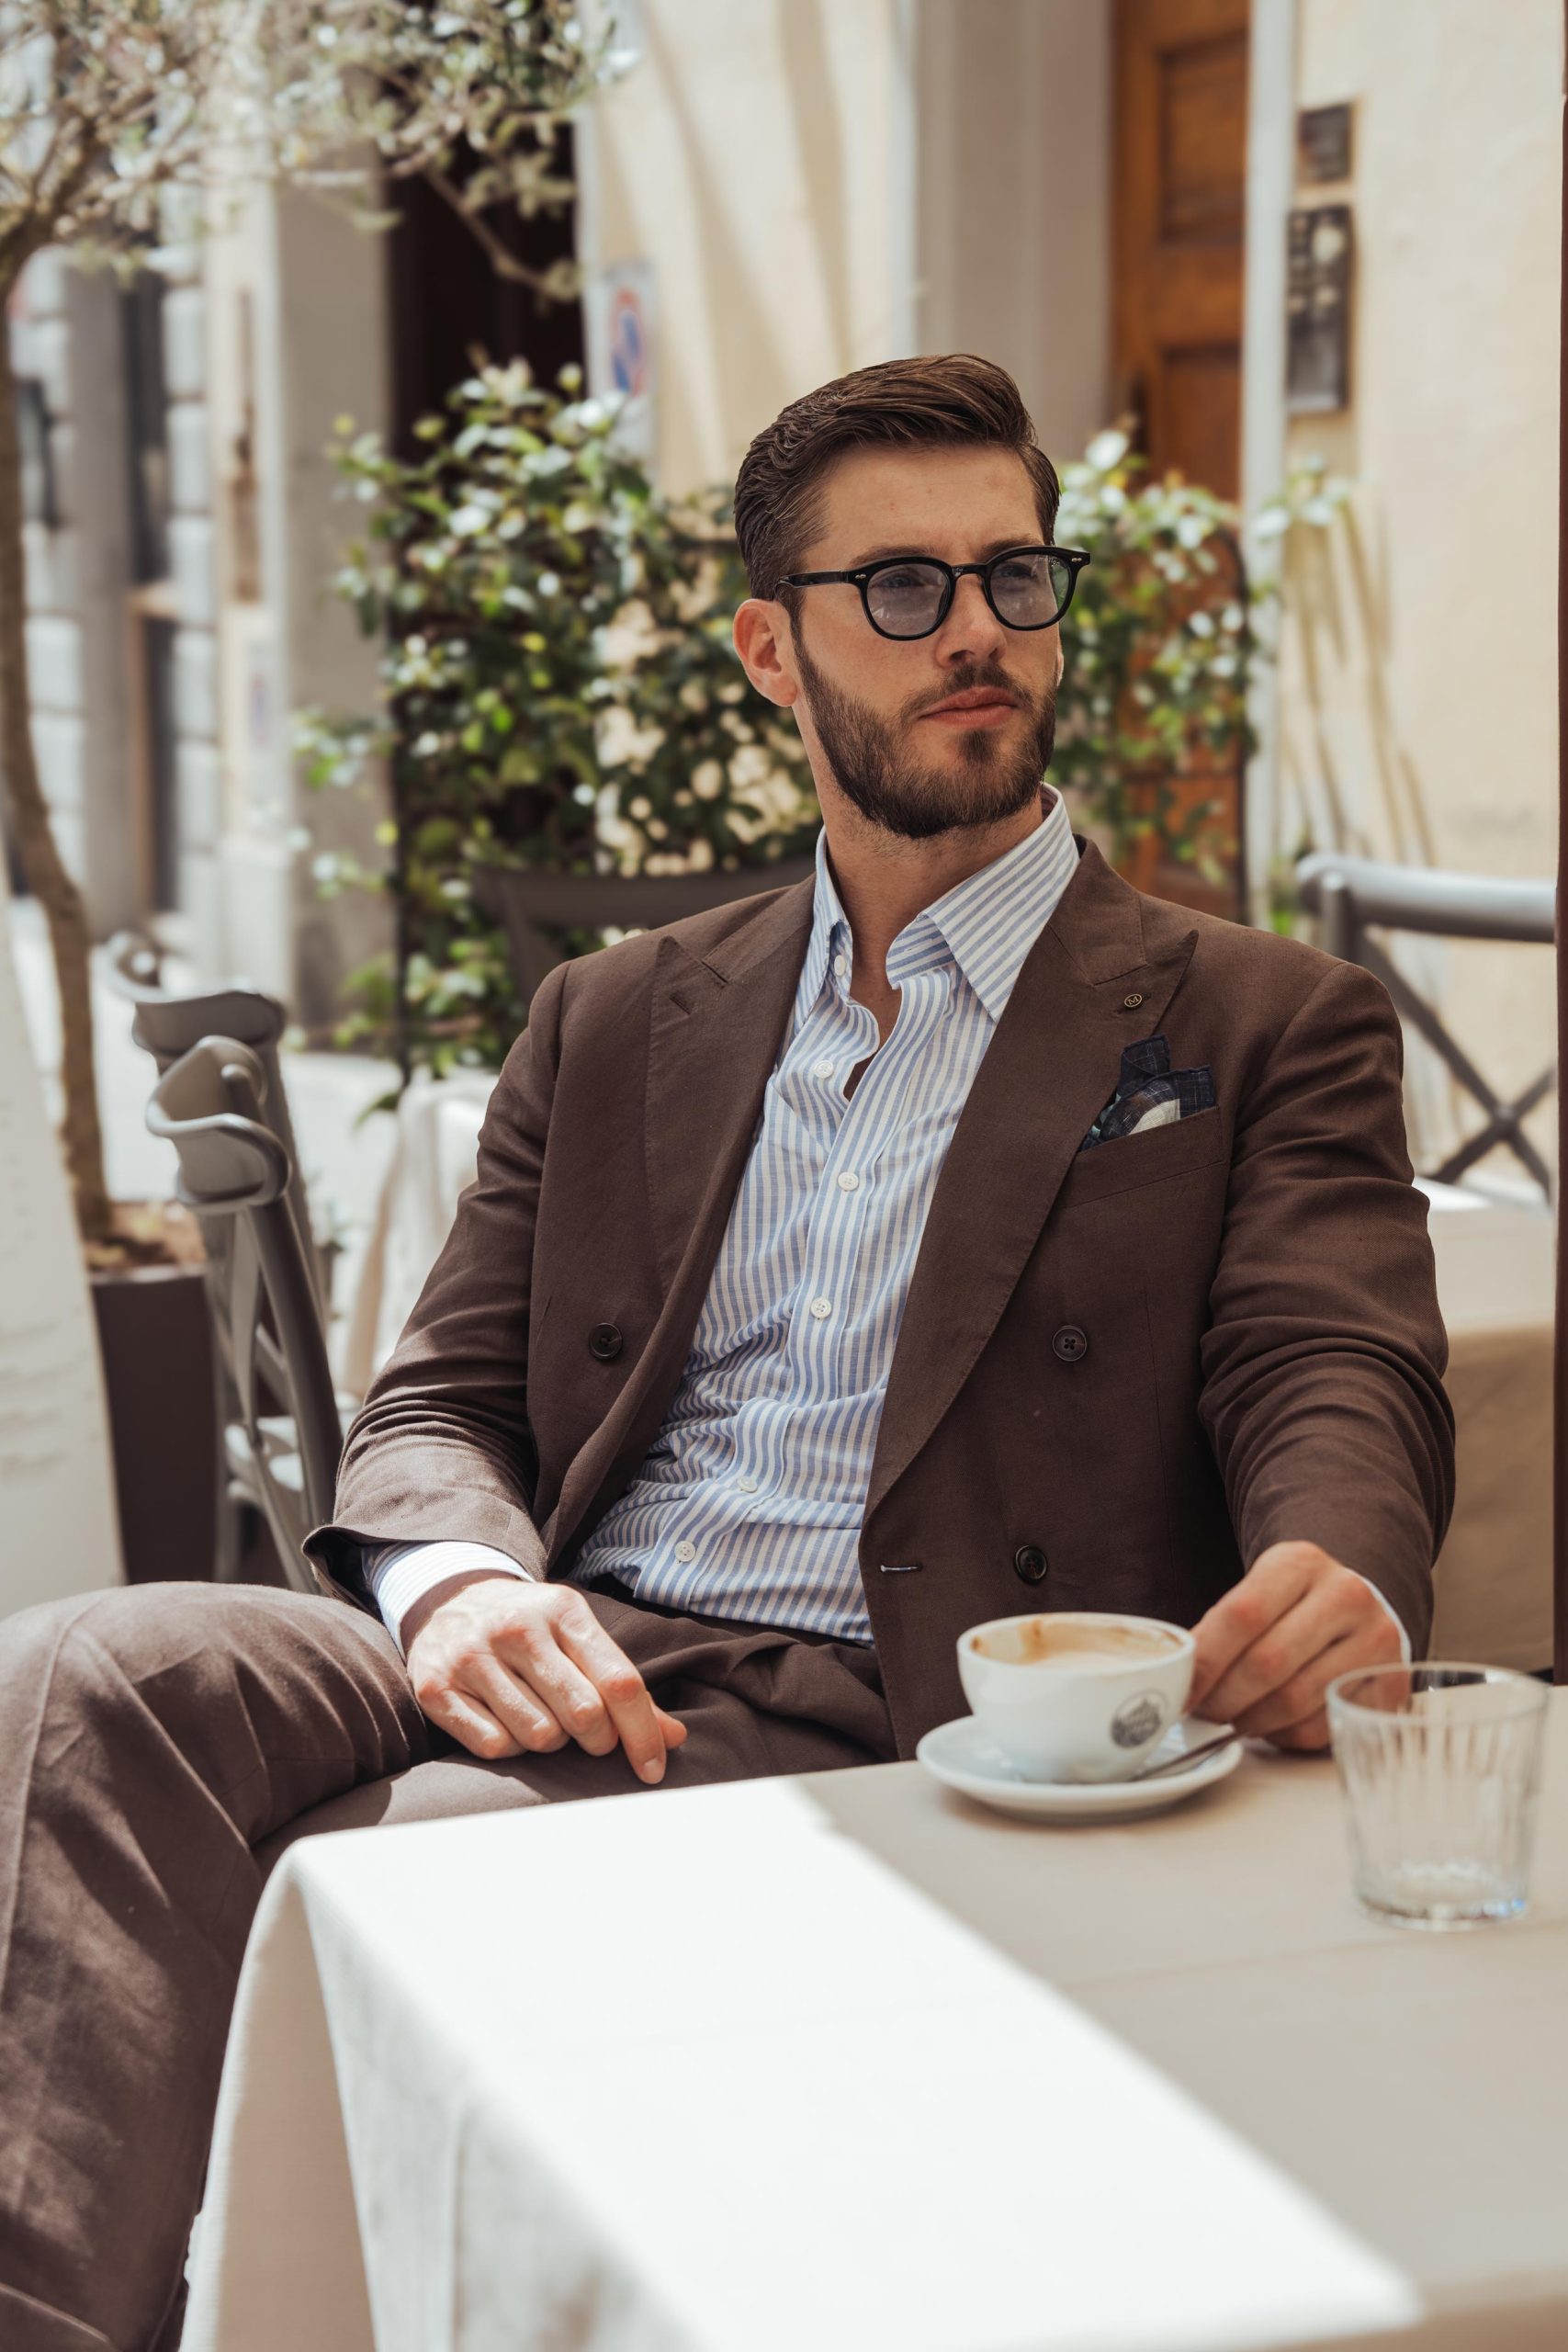 burki at pitti uomo wearing a brown linen suit made by mond of copenhagen